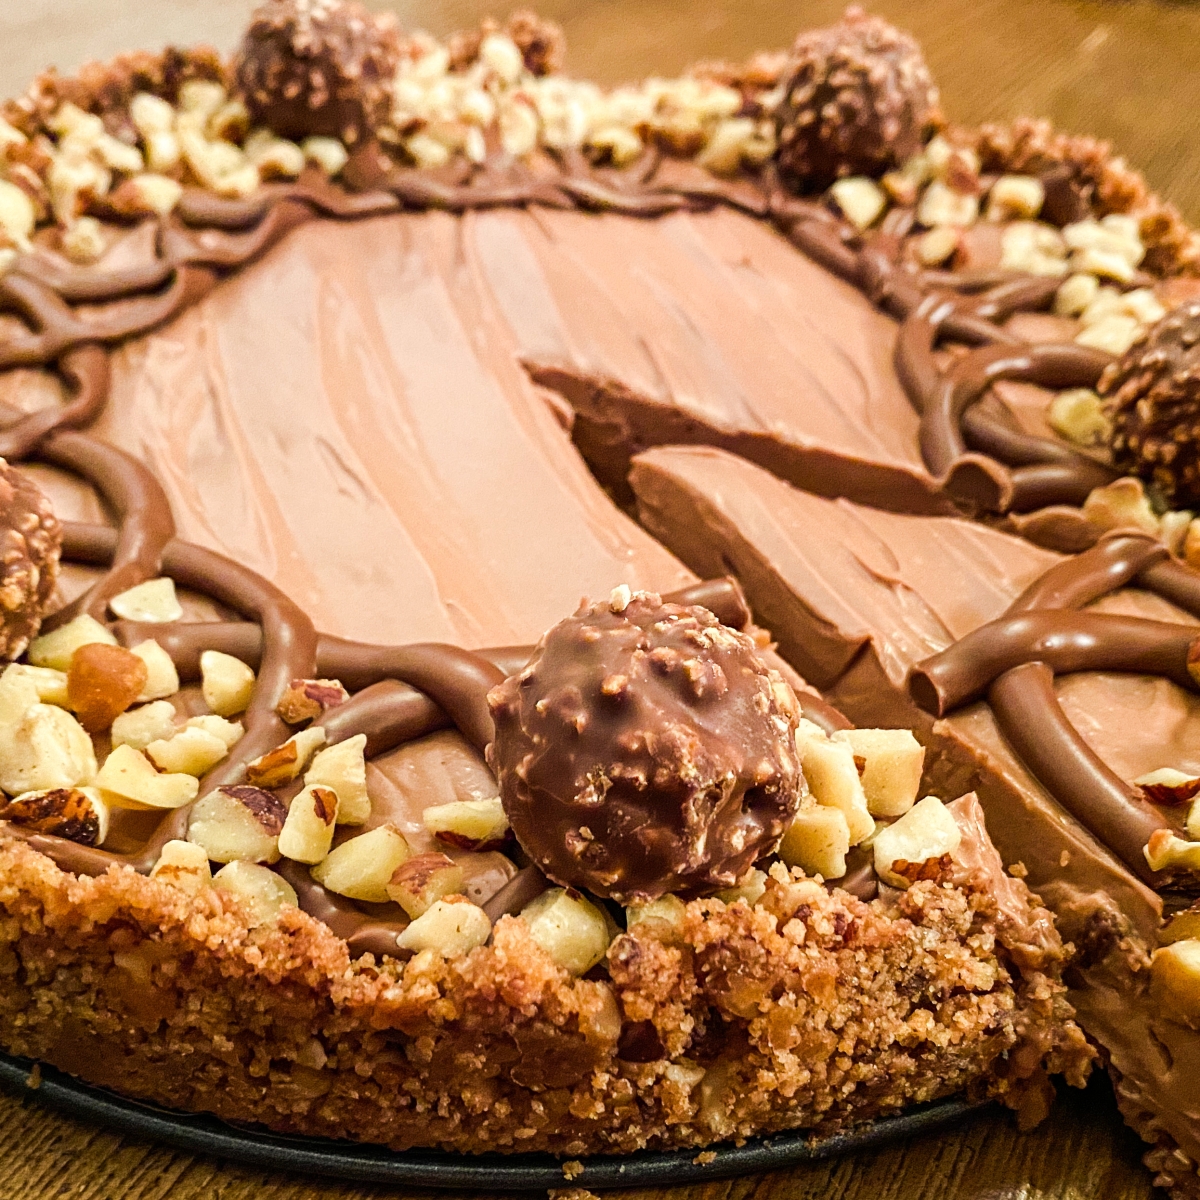 No Bake Nutella Cheesecake with a Chocolate Chip Cookie + Hazelnut Crust